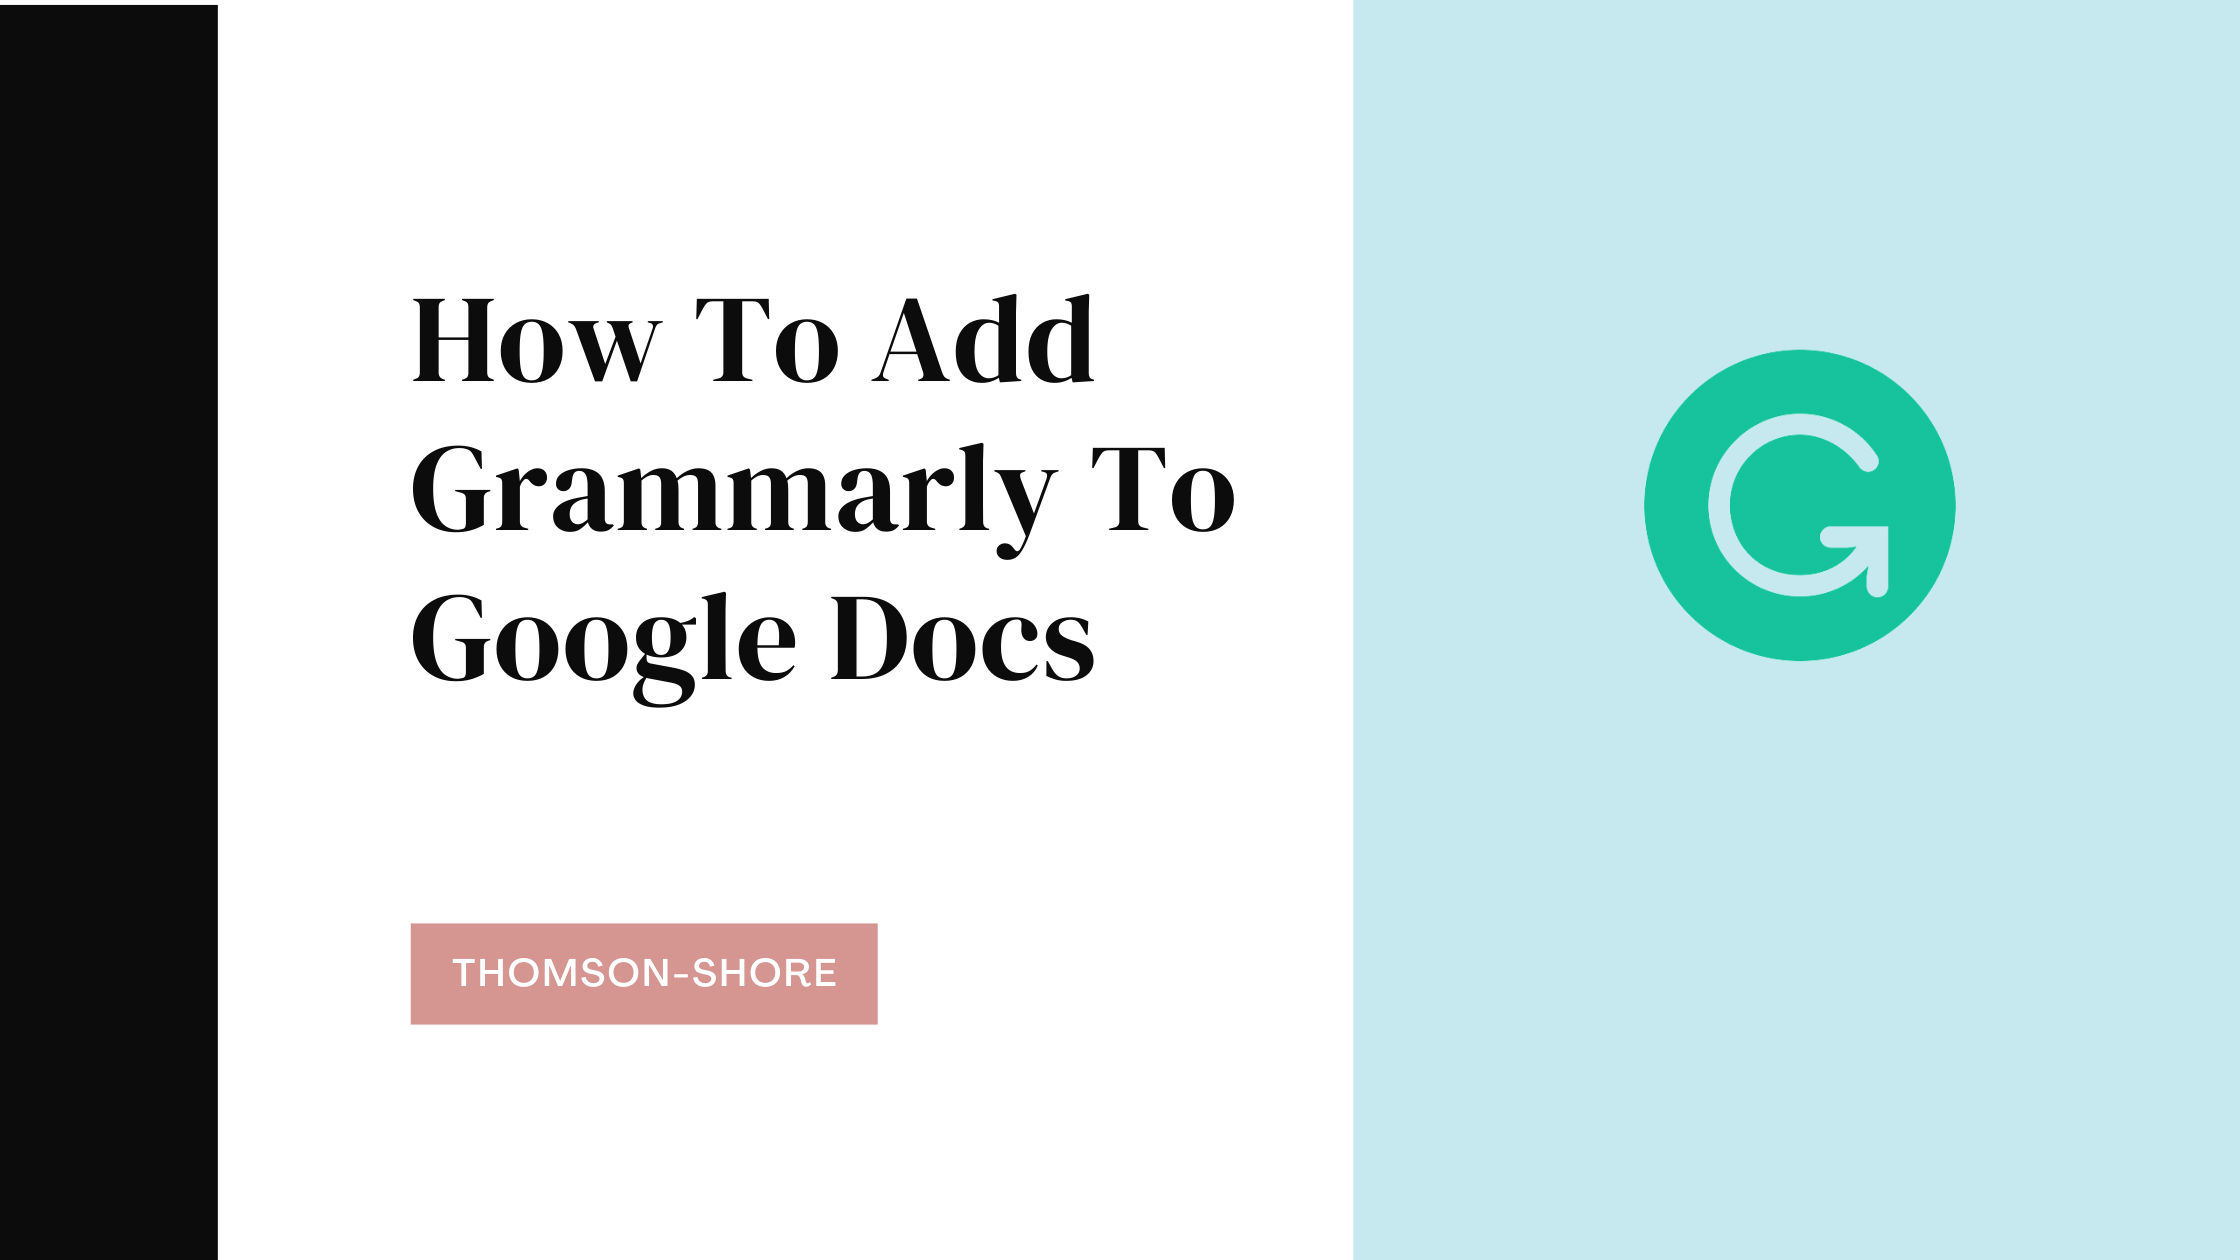 grammarly free for google doce